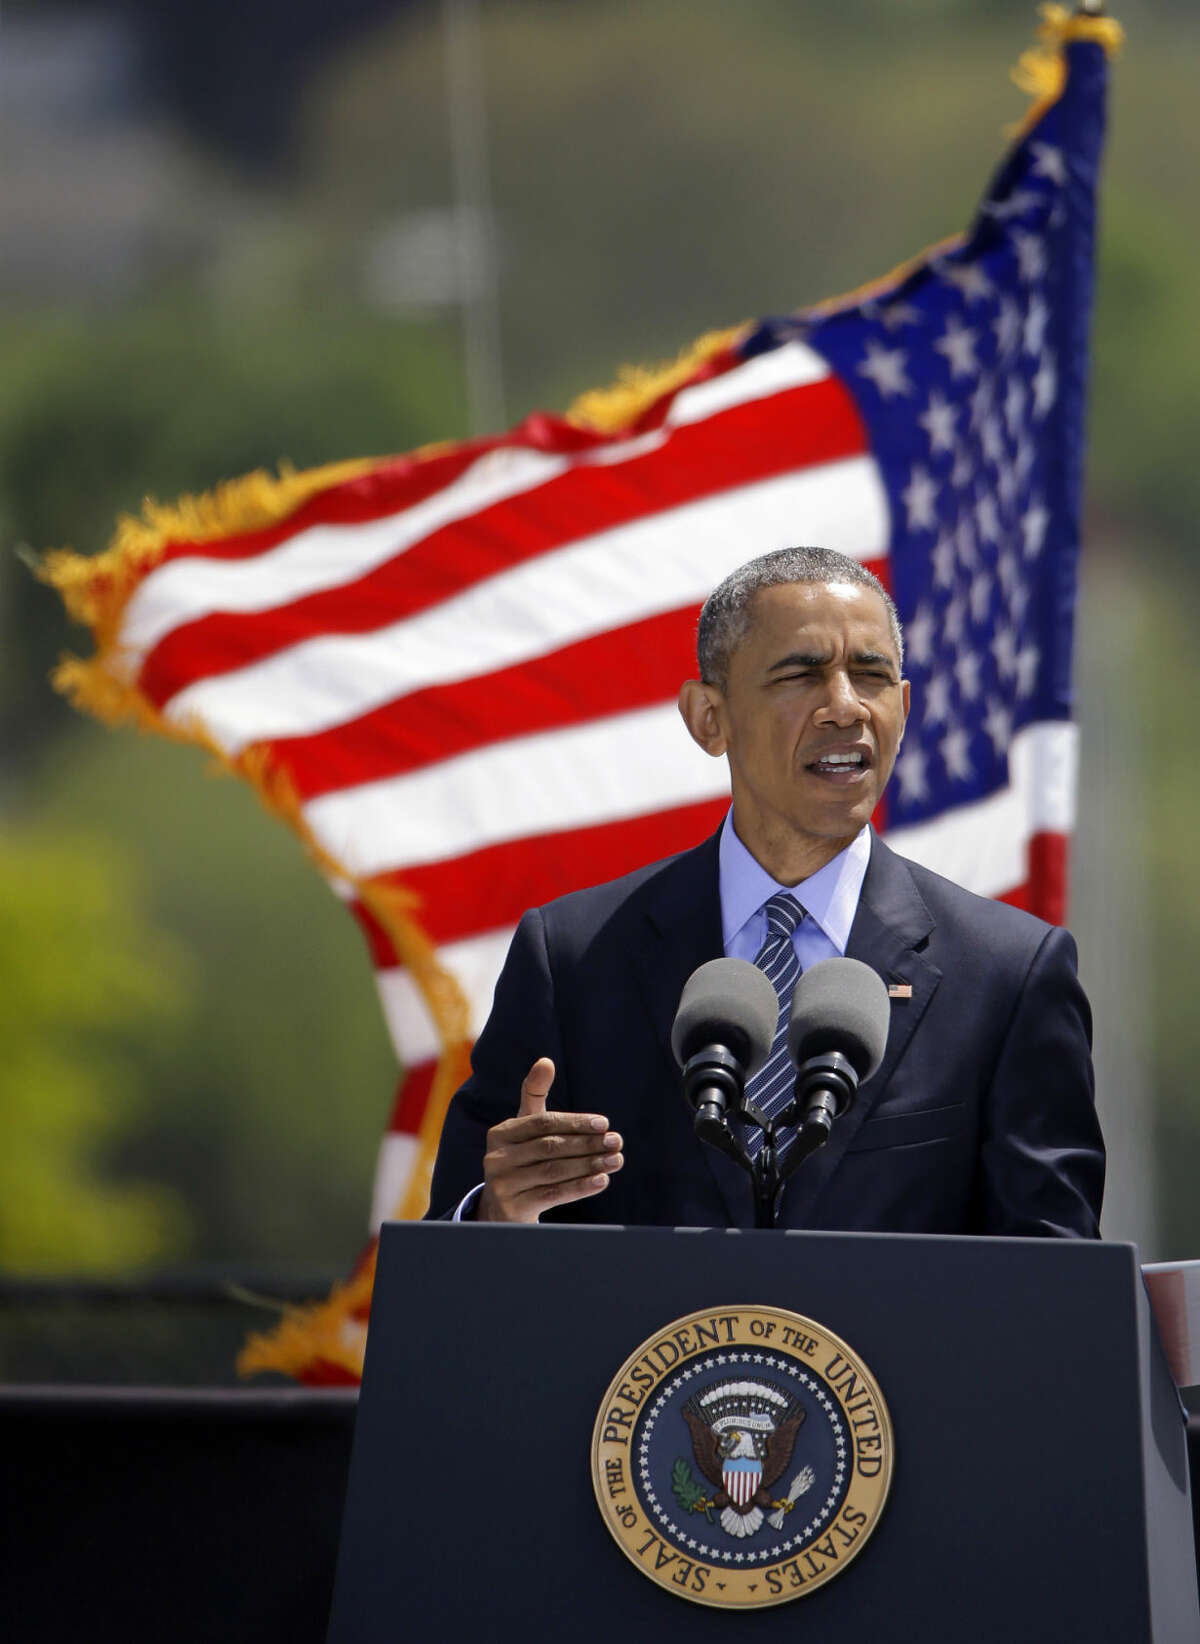 President Barack Obama delivers the commencement address during the United States Coast Guard Academy's 134th Commencement Exercises, Wednesday, May 20, 2015, in New London, Conn. (AP Photo/Stephan Savoia)